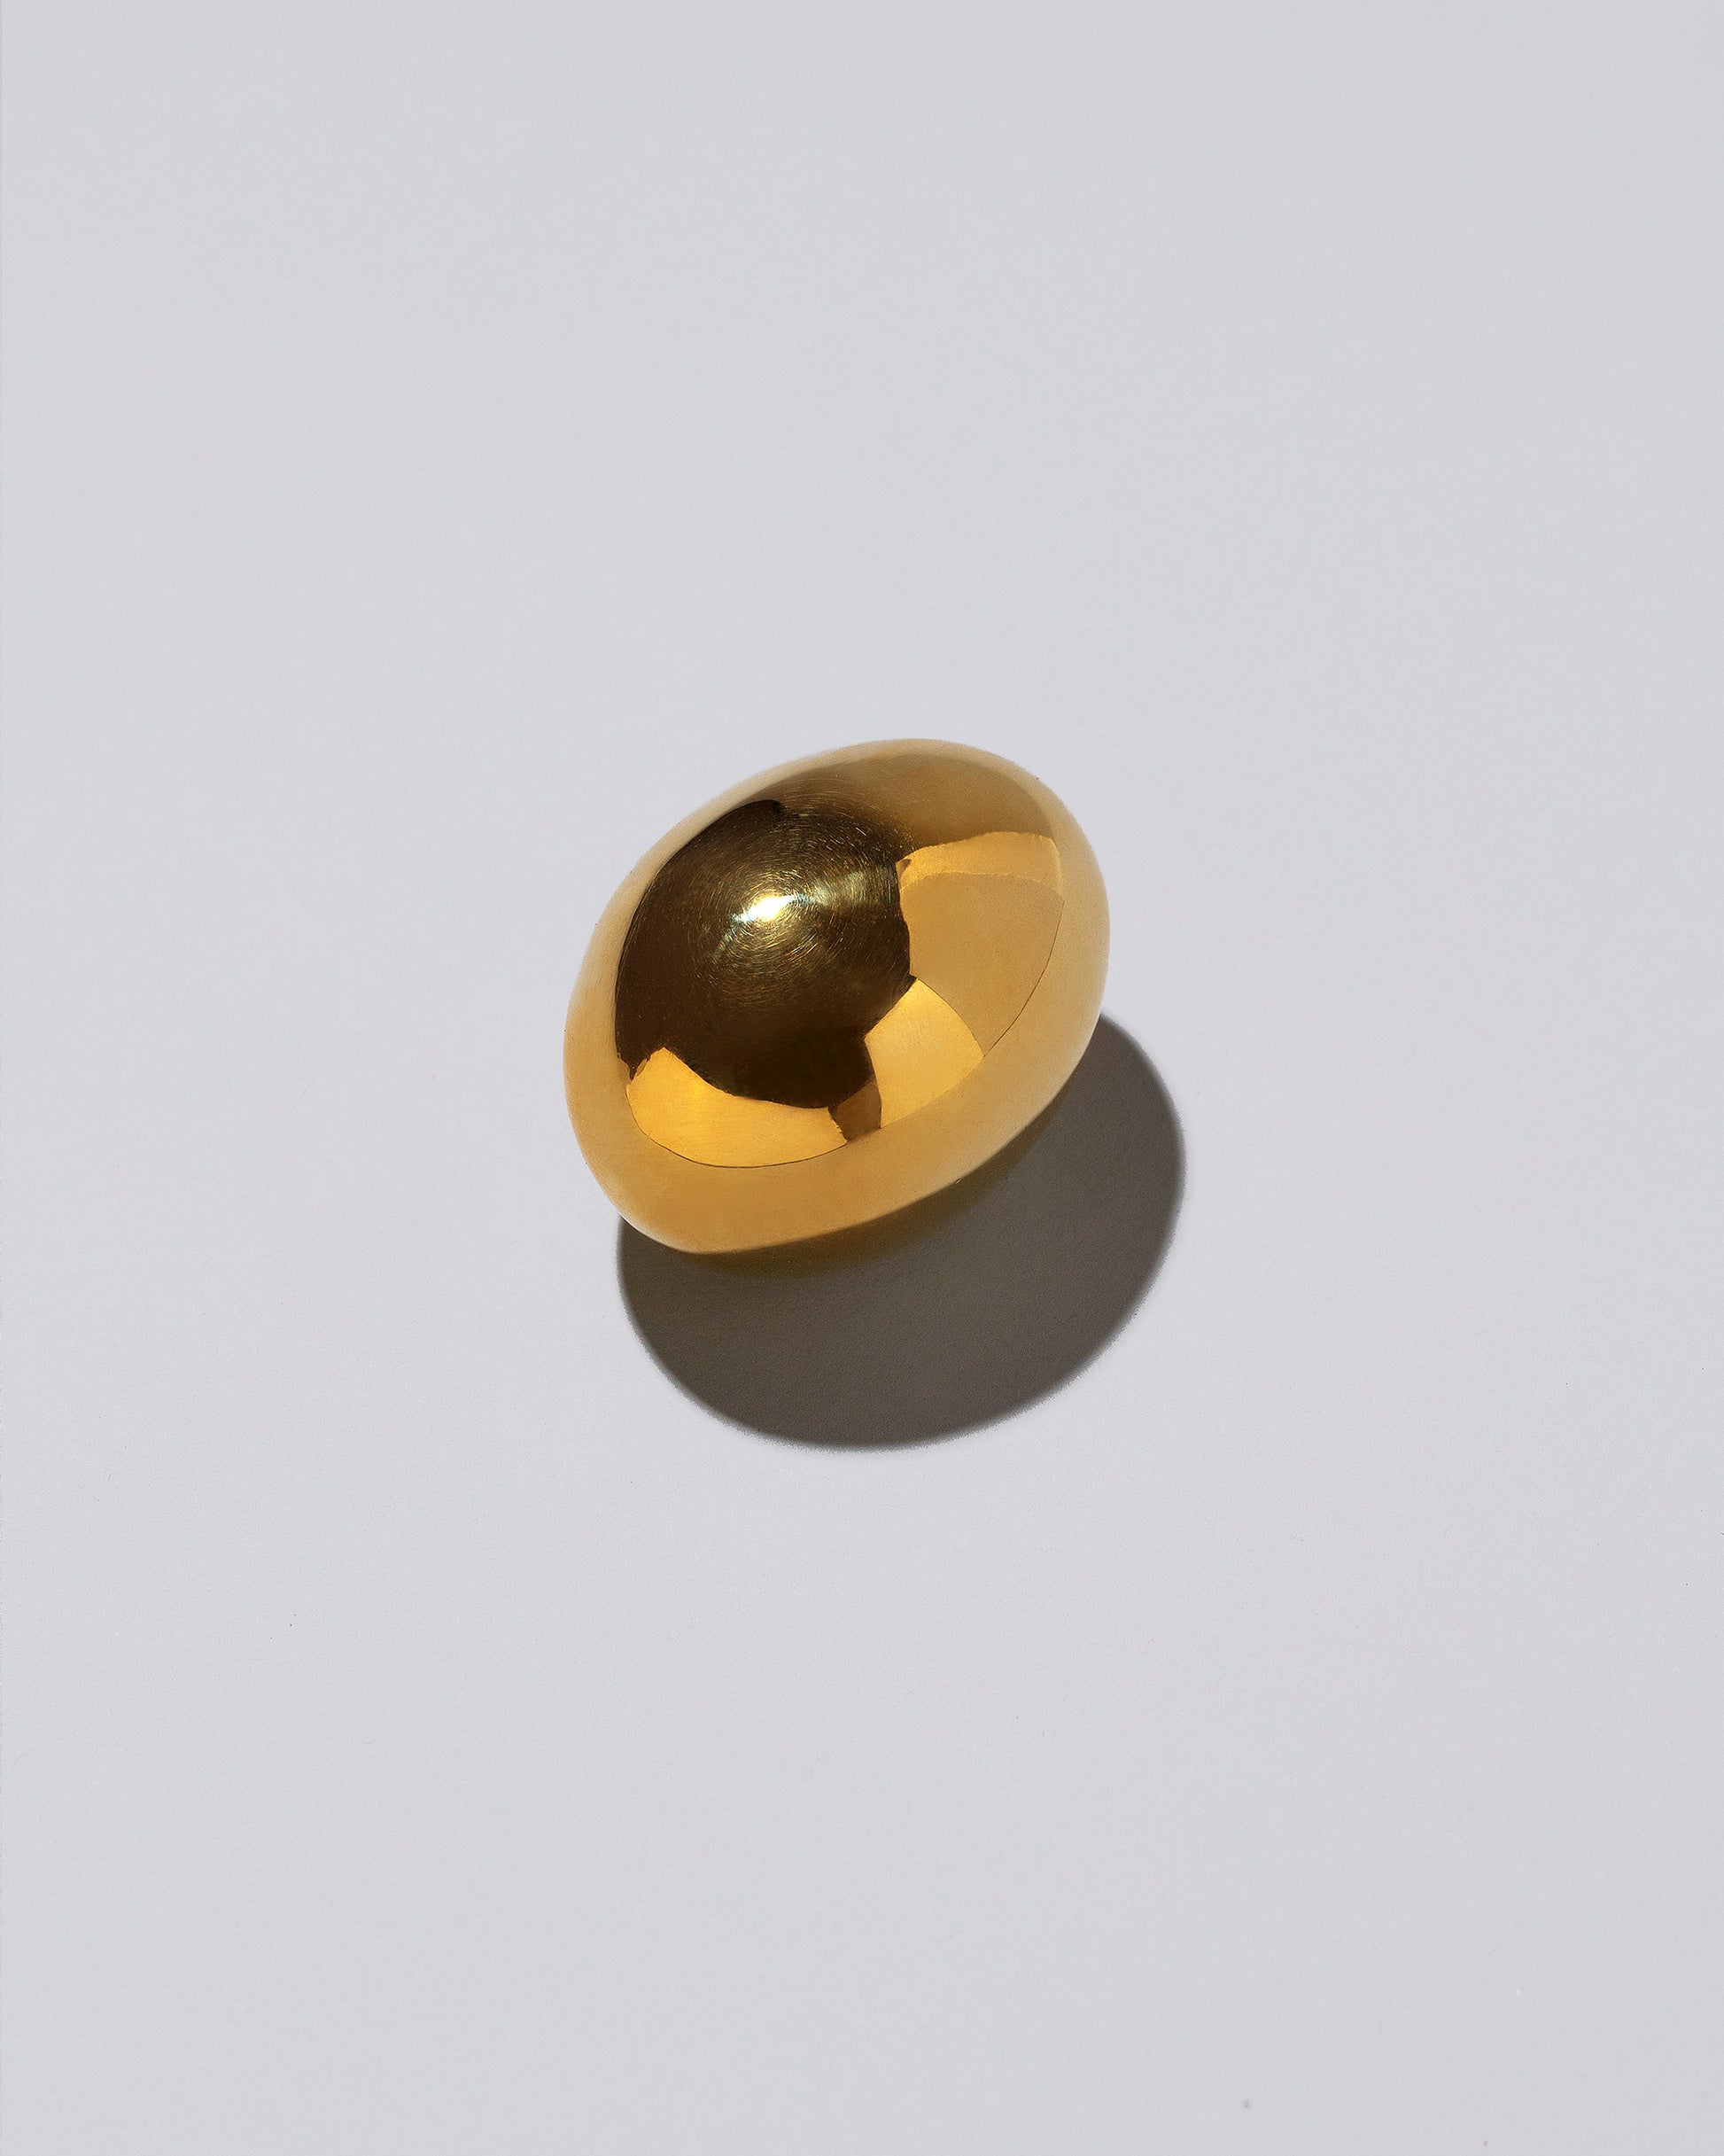 View from the side of the Carl Auböck Brass Egg Paperweight on light color background.